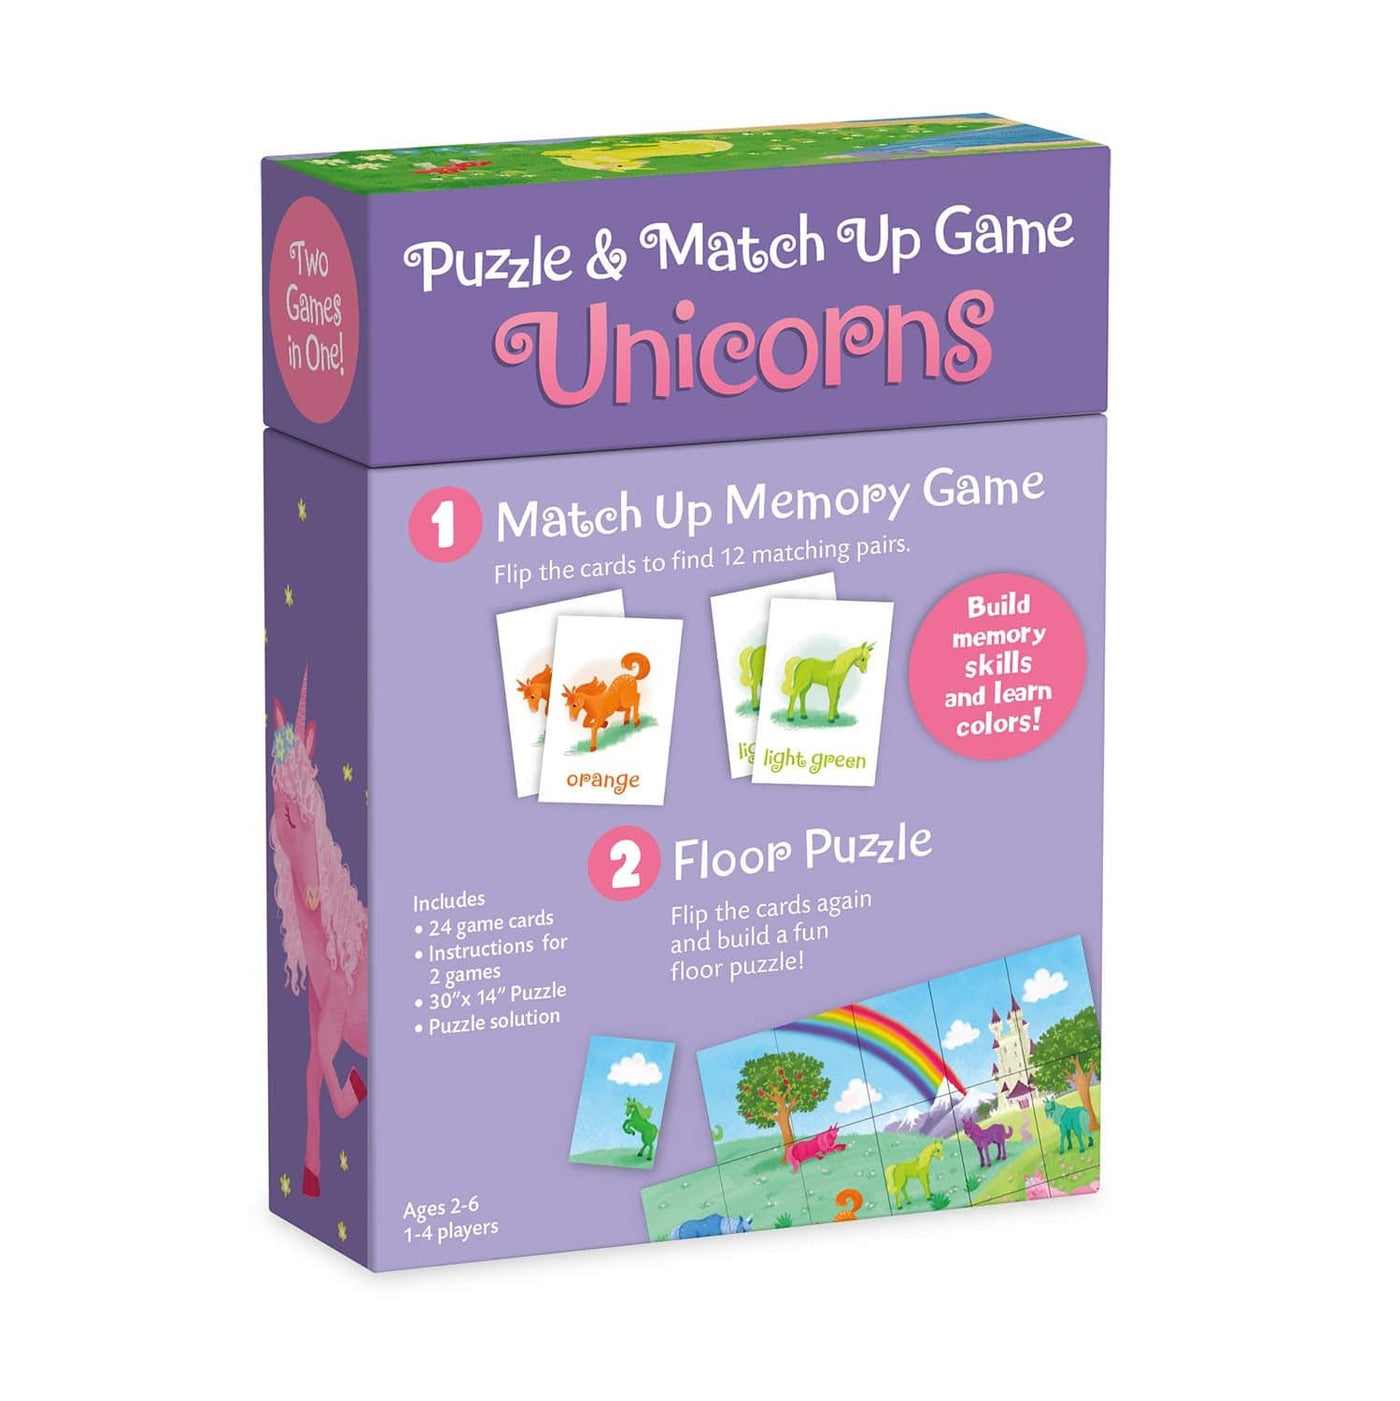 Unicorns Puzzle and Match Up Game by Peaceable Kingdom, USA Game